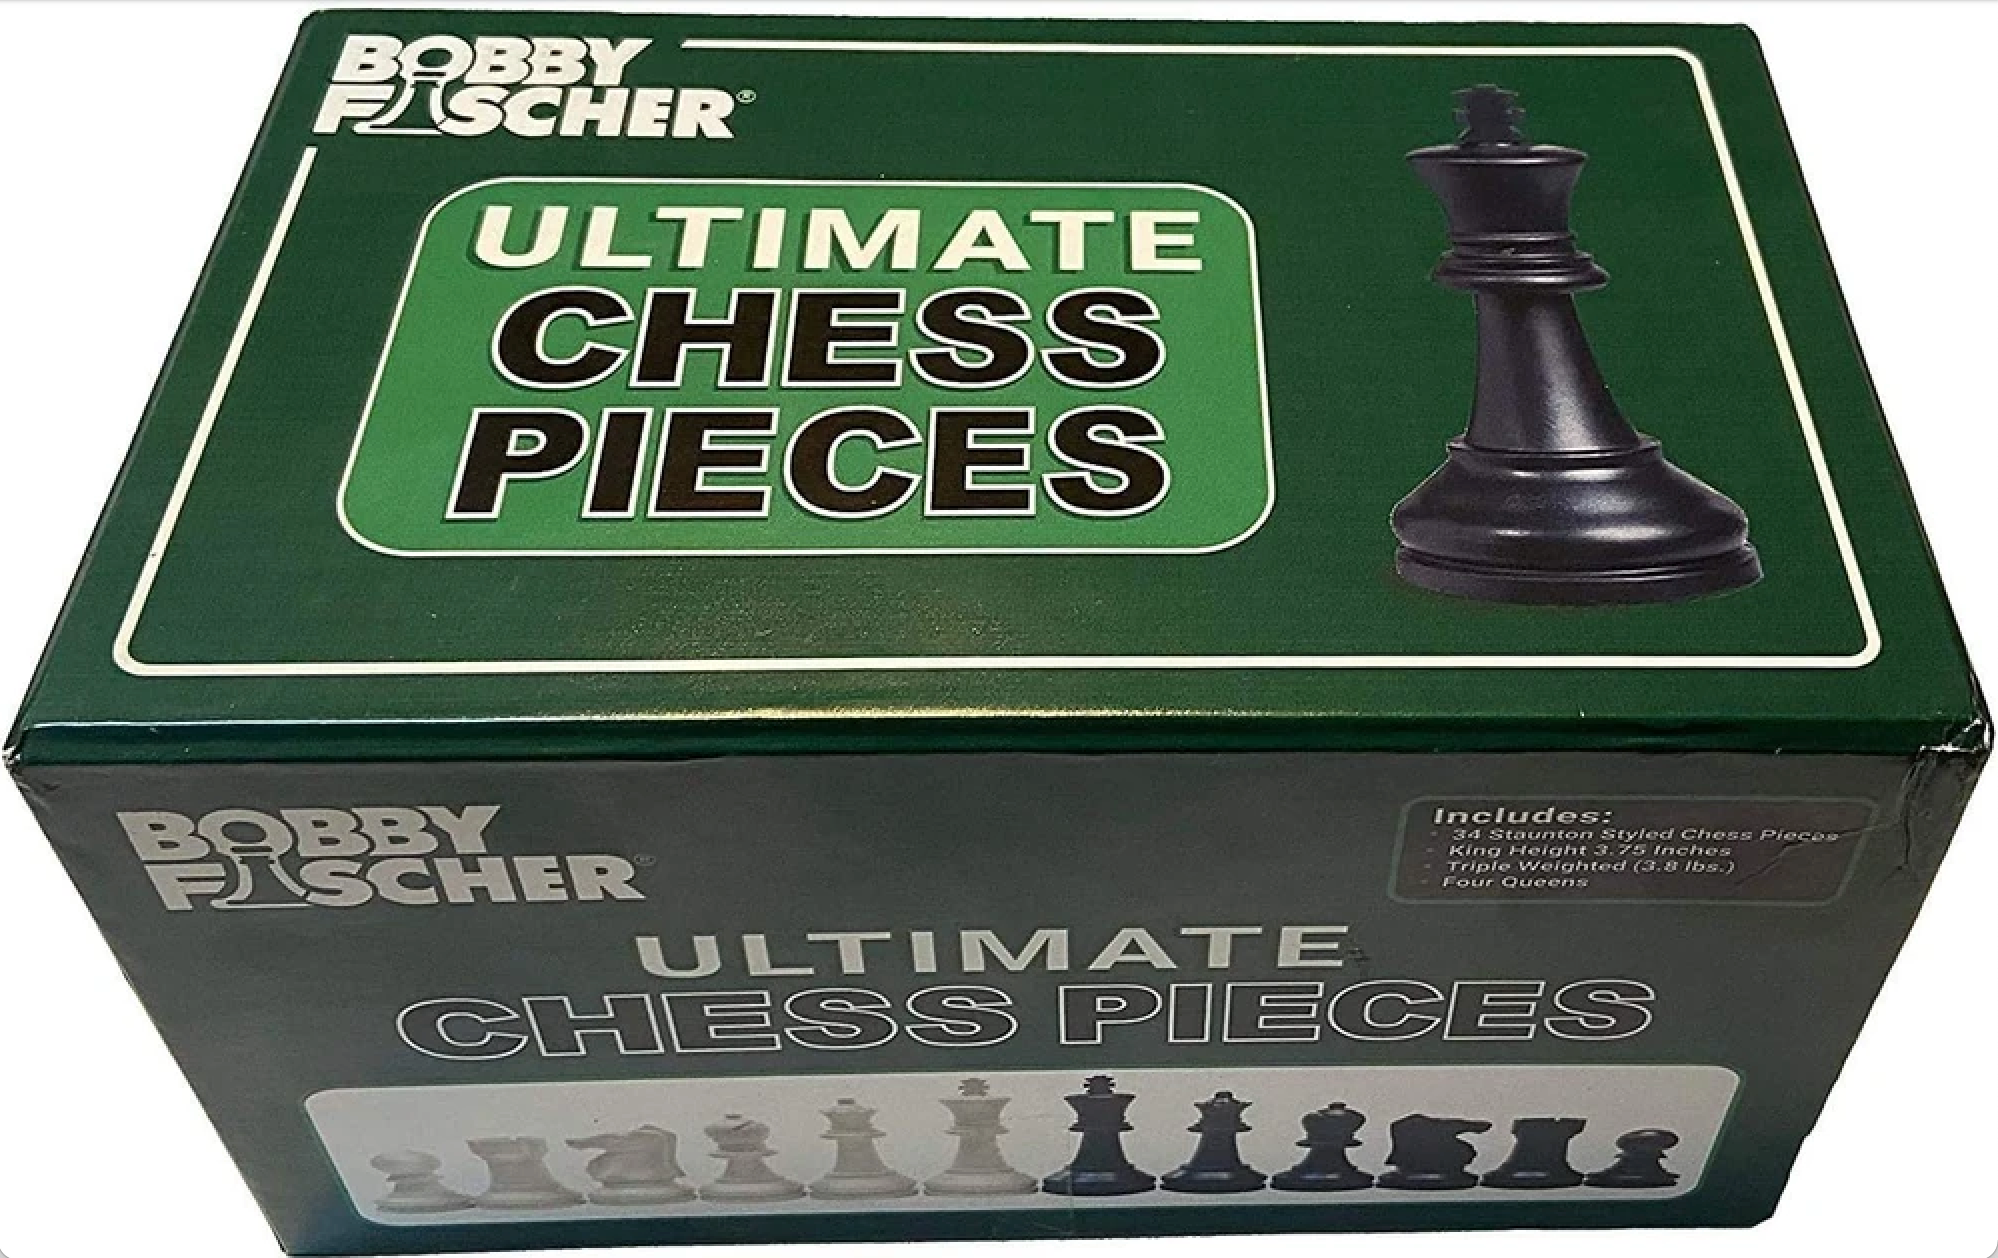 Bobby Fischer Ultimate Chess Pieces